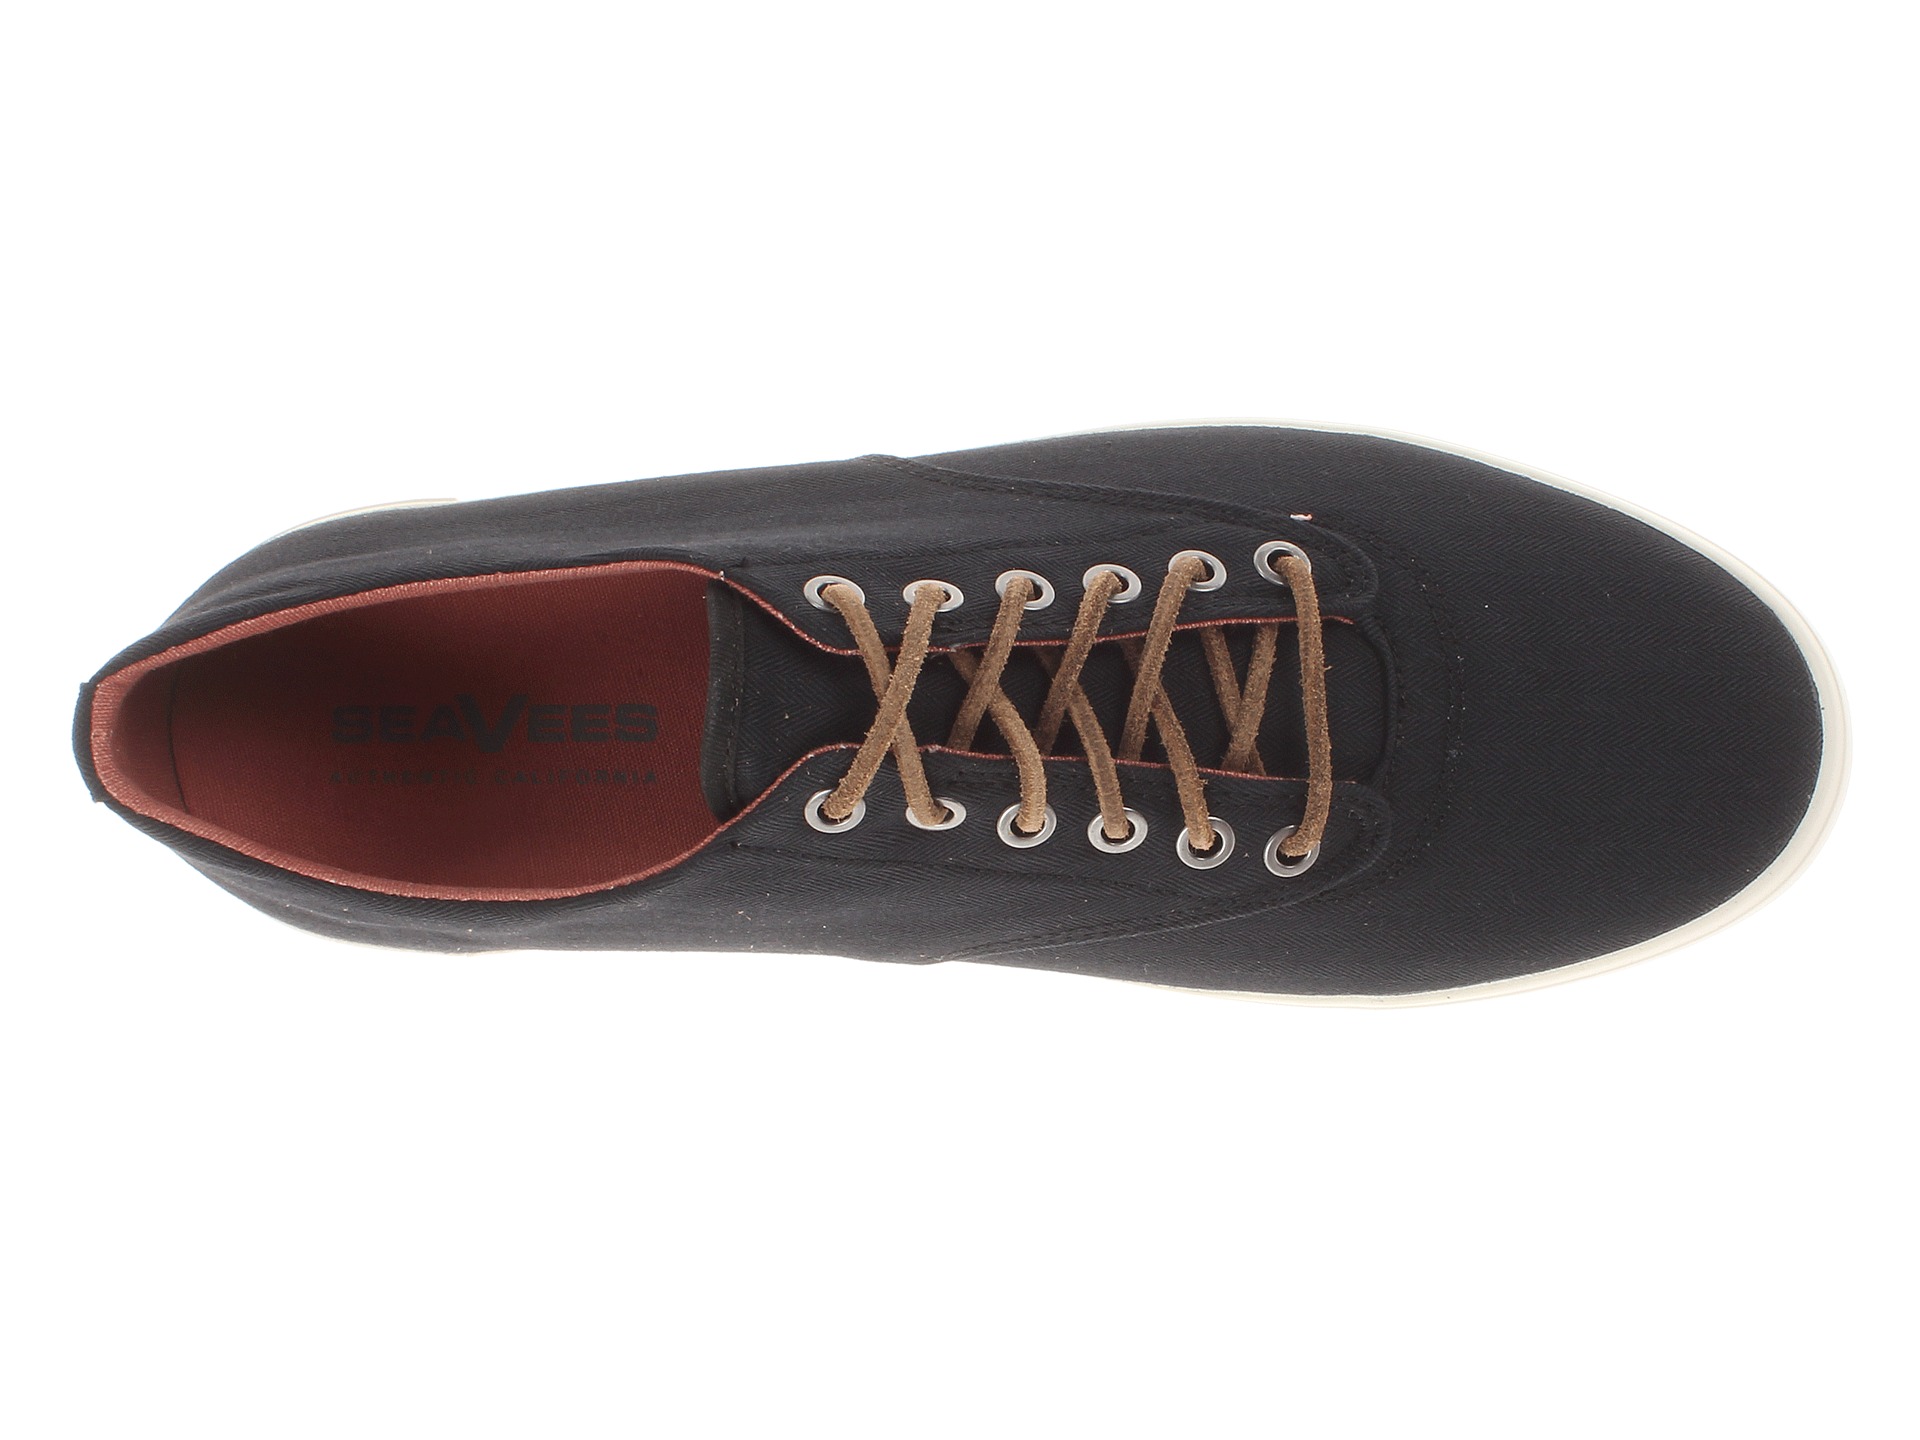 Seavees 08 63 Hermosa Plimsoll Bocce, Shoes, Men | Shipped Free at Zappos